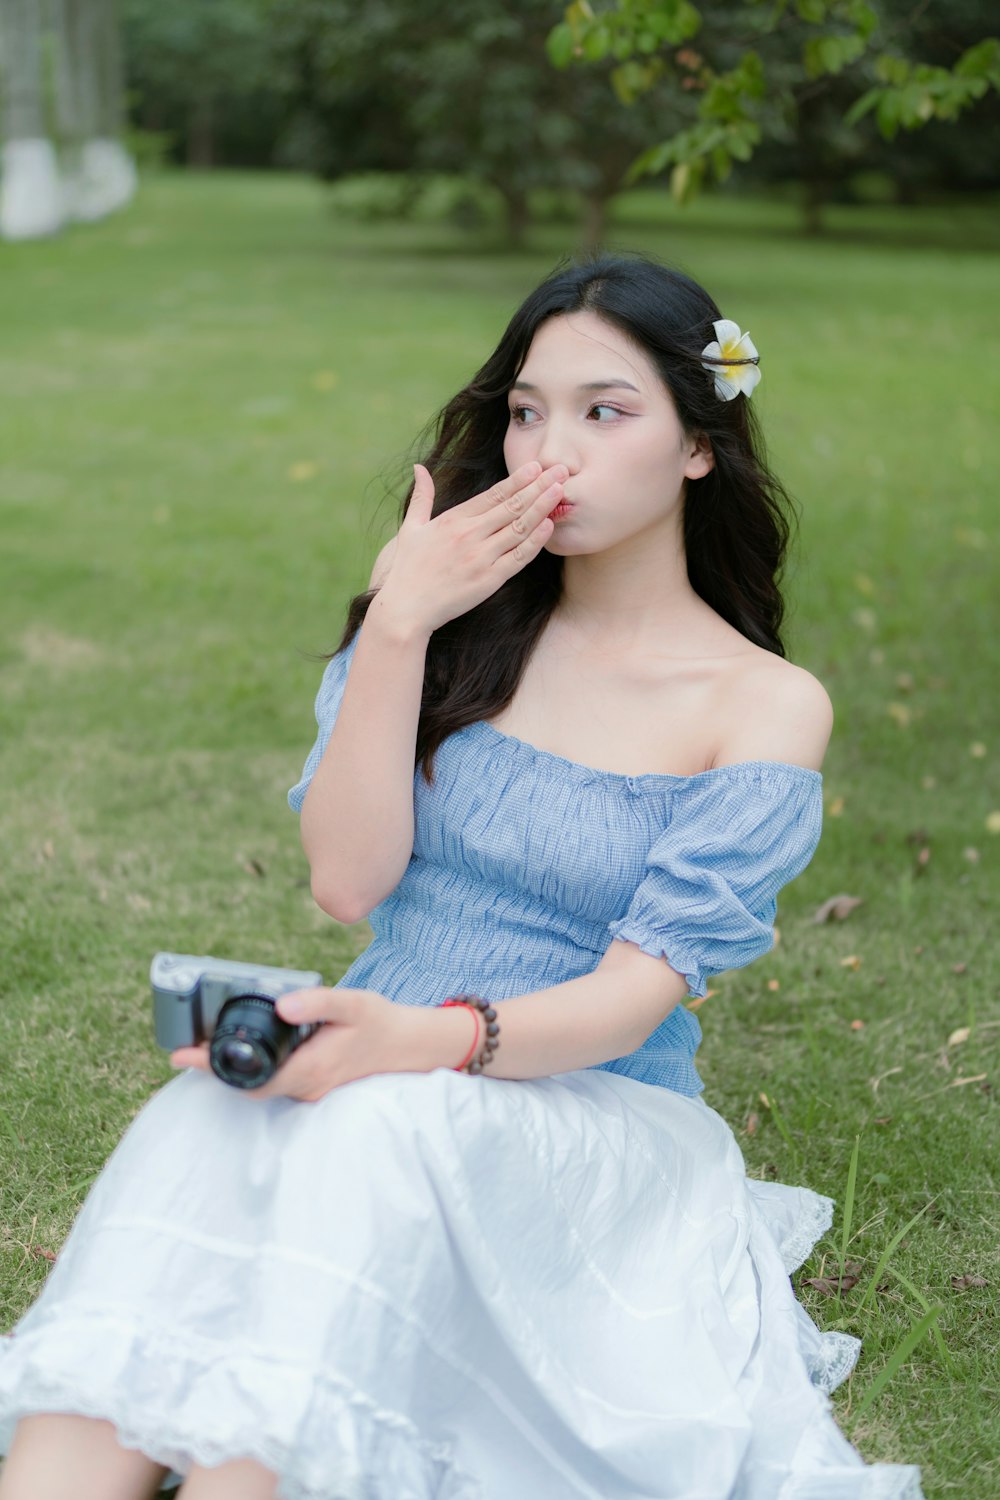 a woman sitting on the grass with a camera